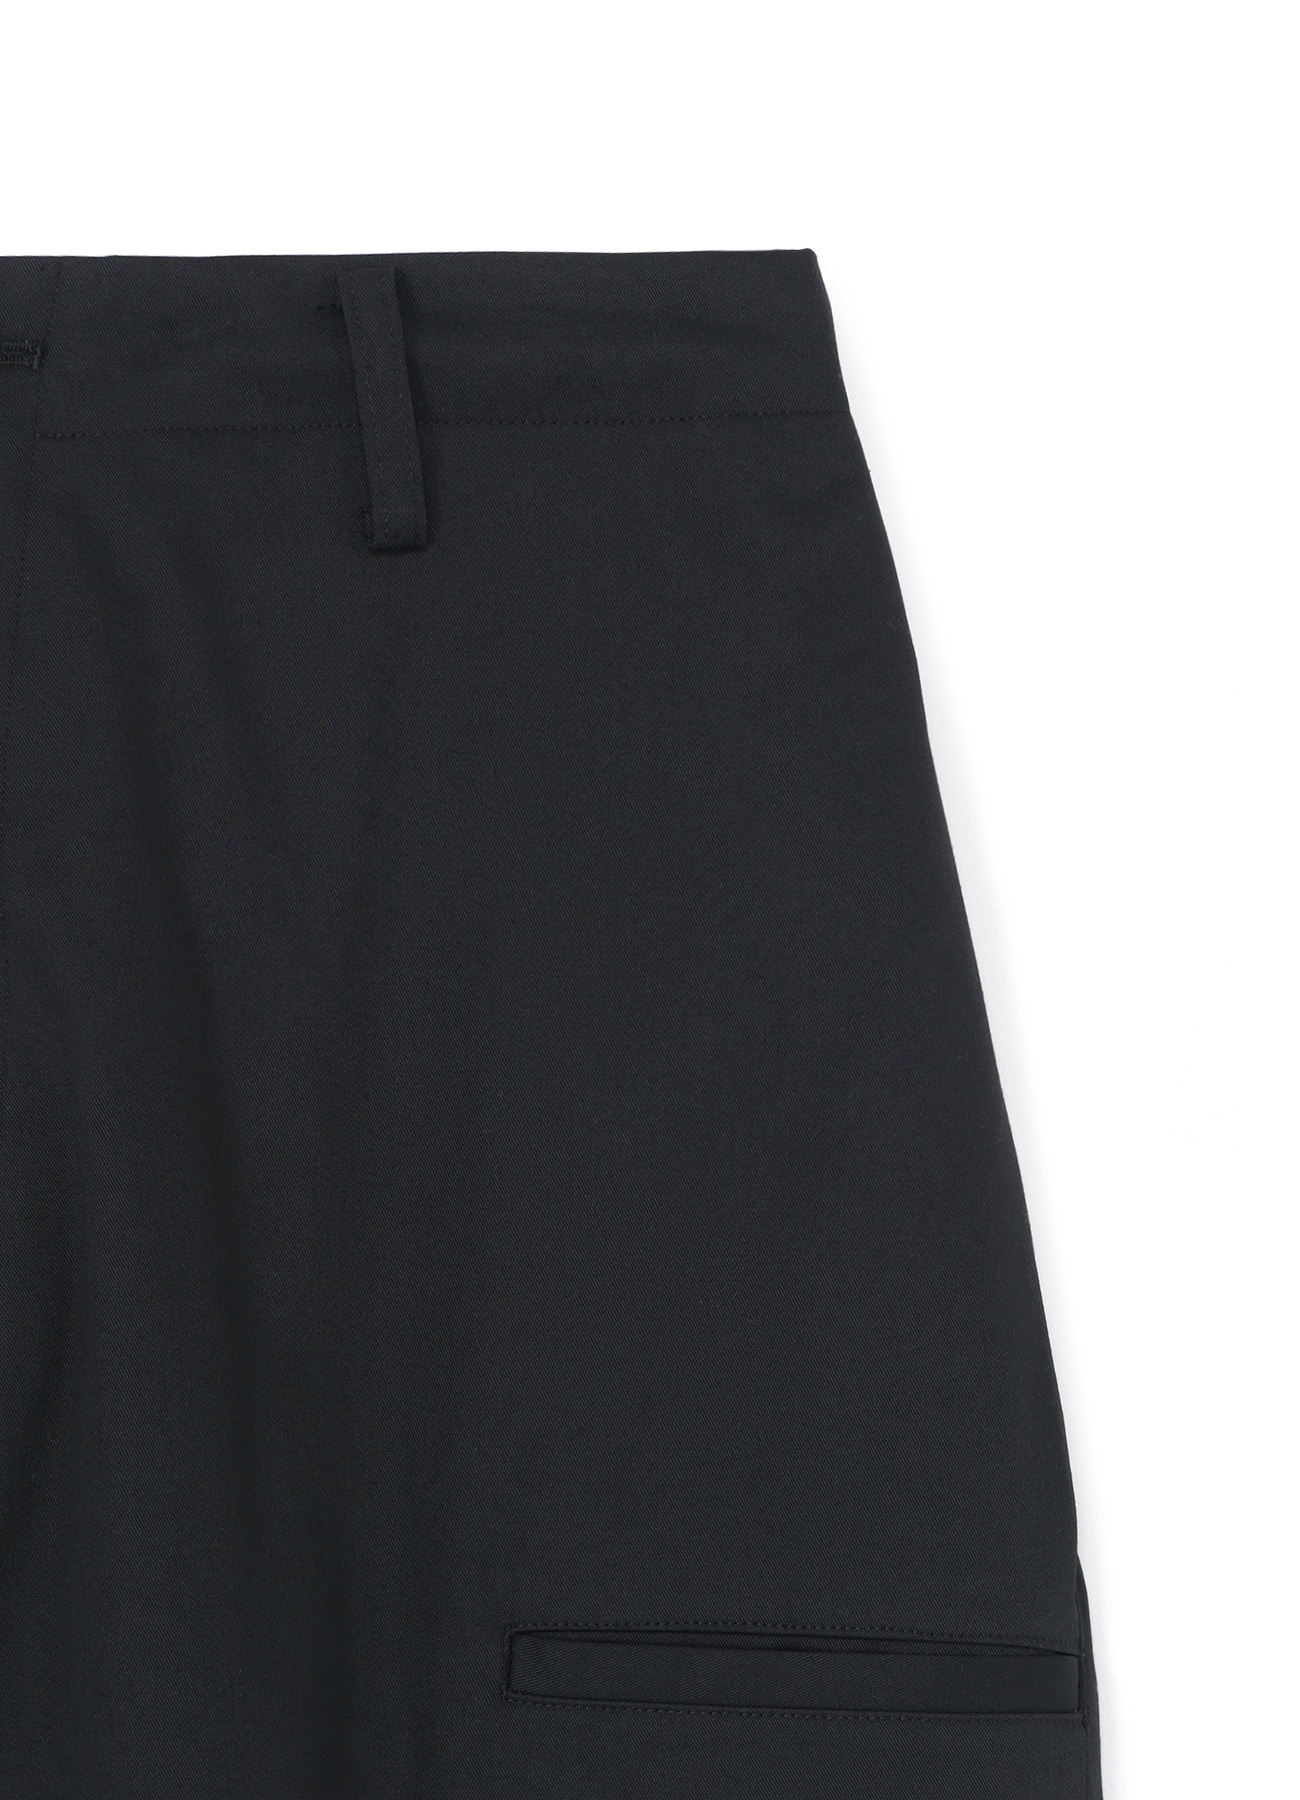 POLYESTER/COTTON TWILL PANTS WITH SIDE POCKET